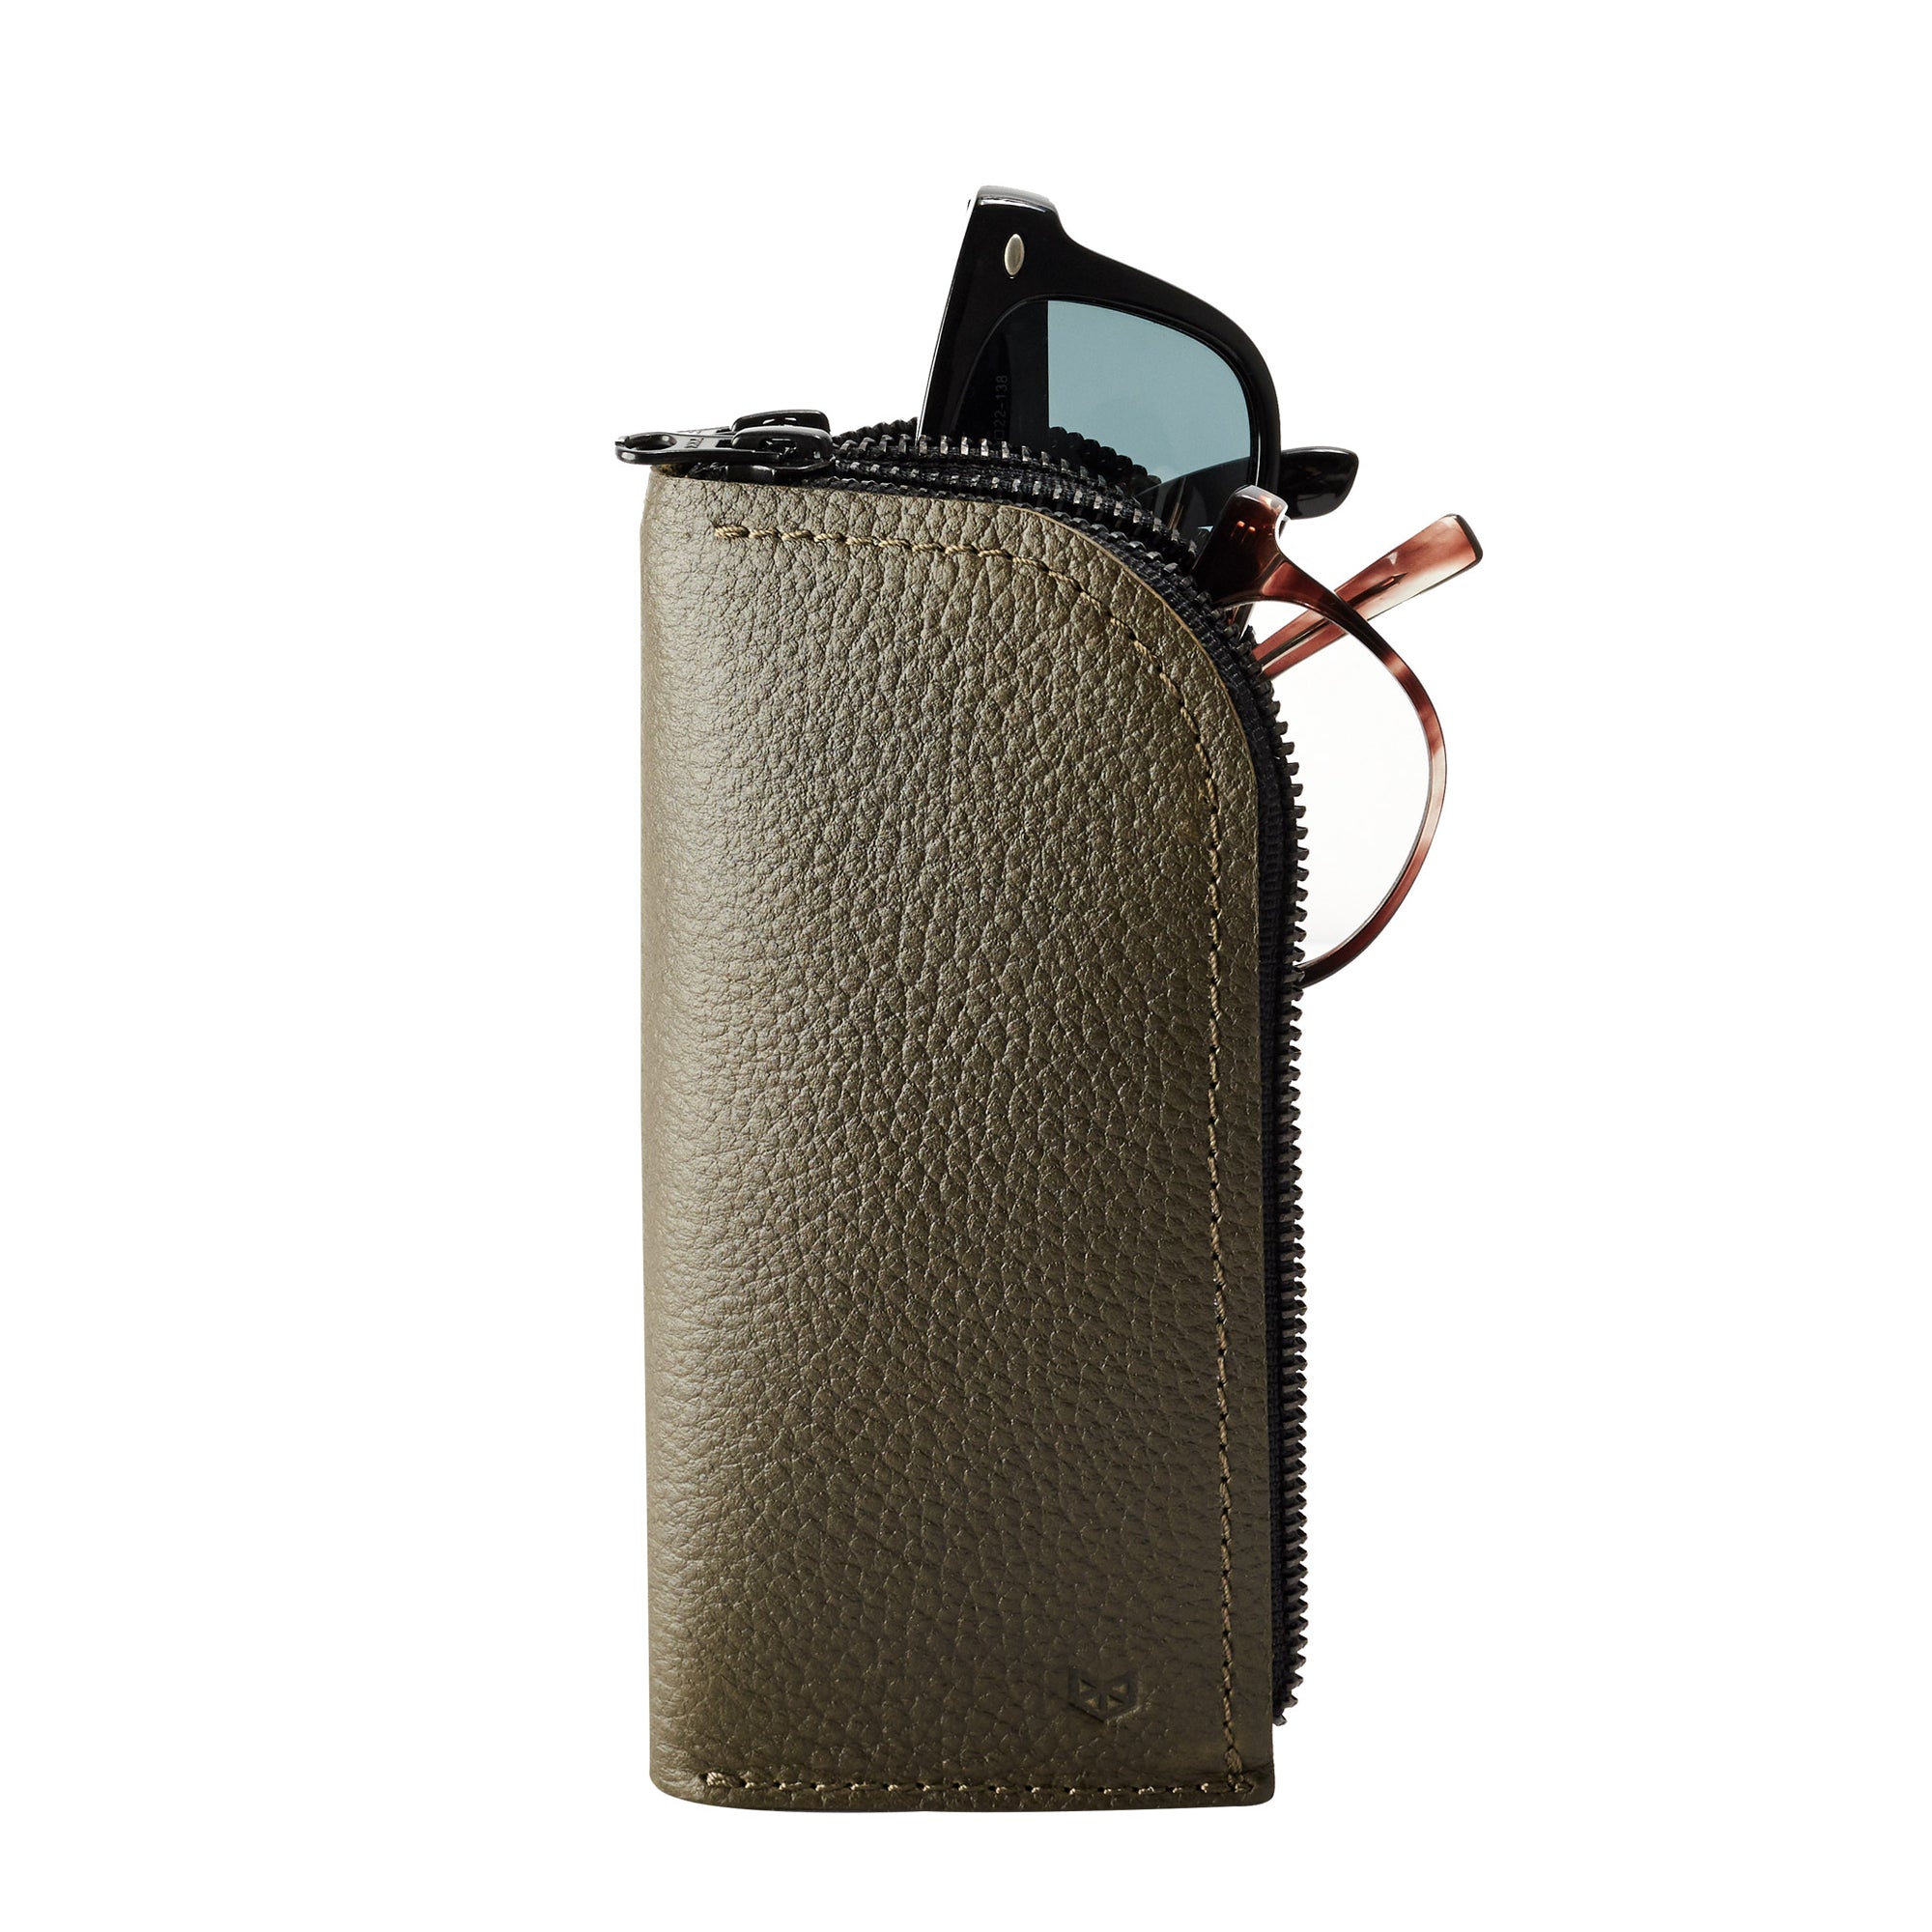 Handmade green leather glasses case with double compartment for sunglasses and reading glasses